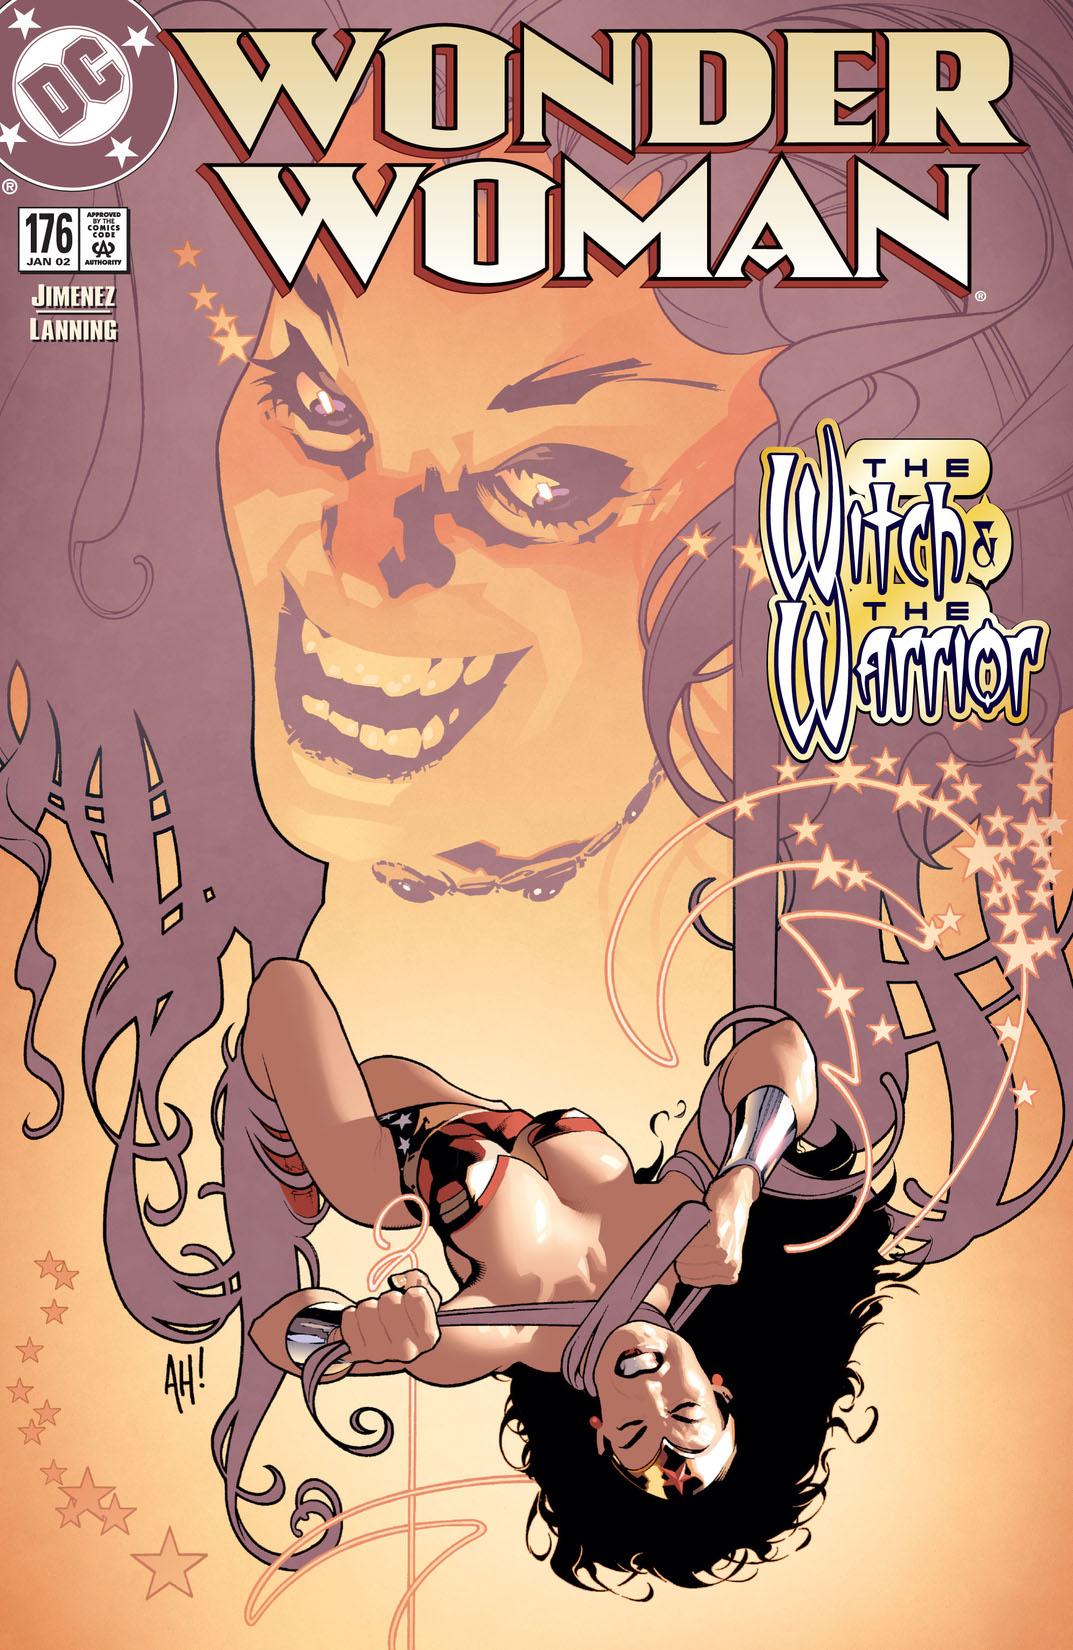 Wonder Woman (1986-) #176 preview images